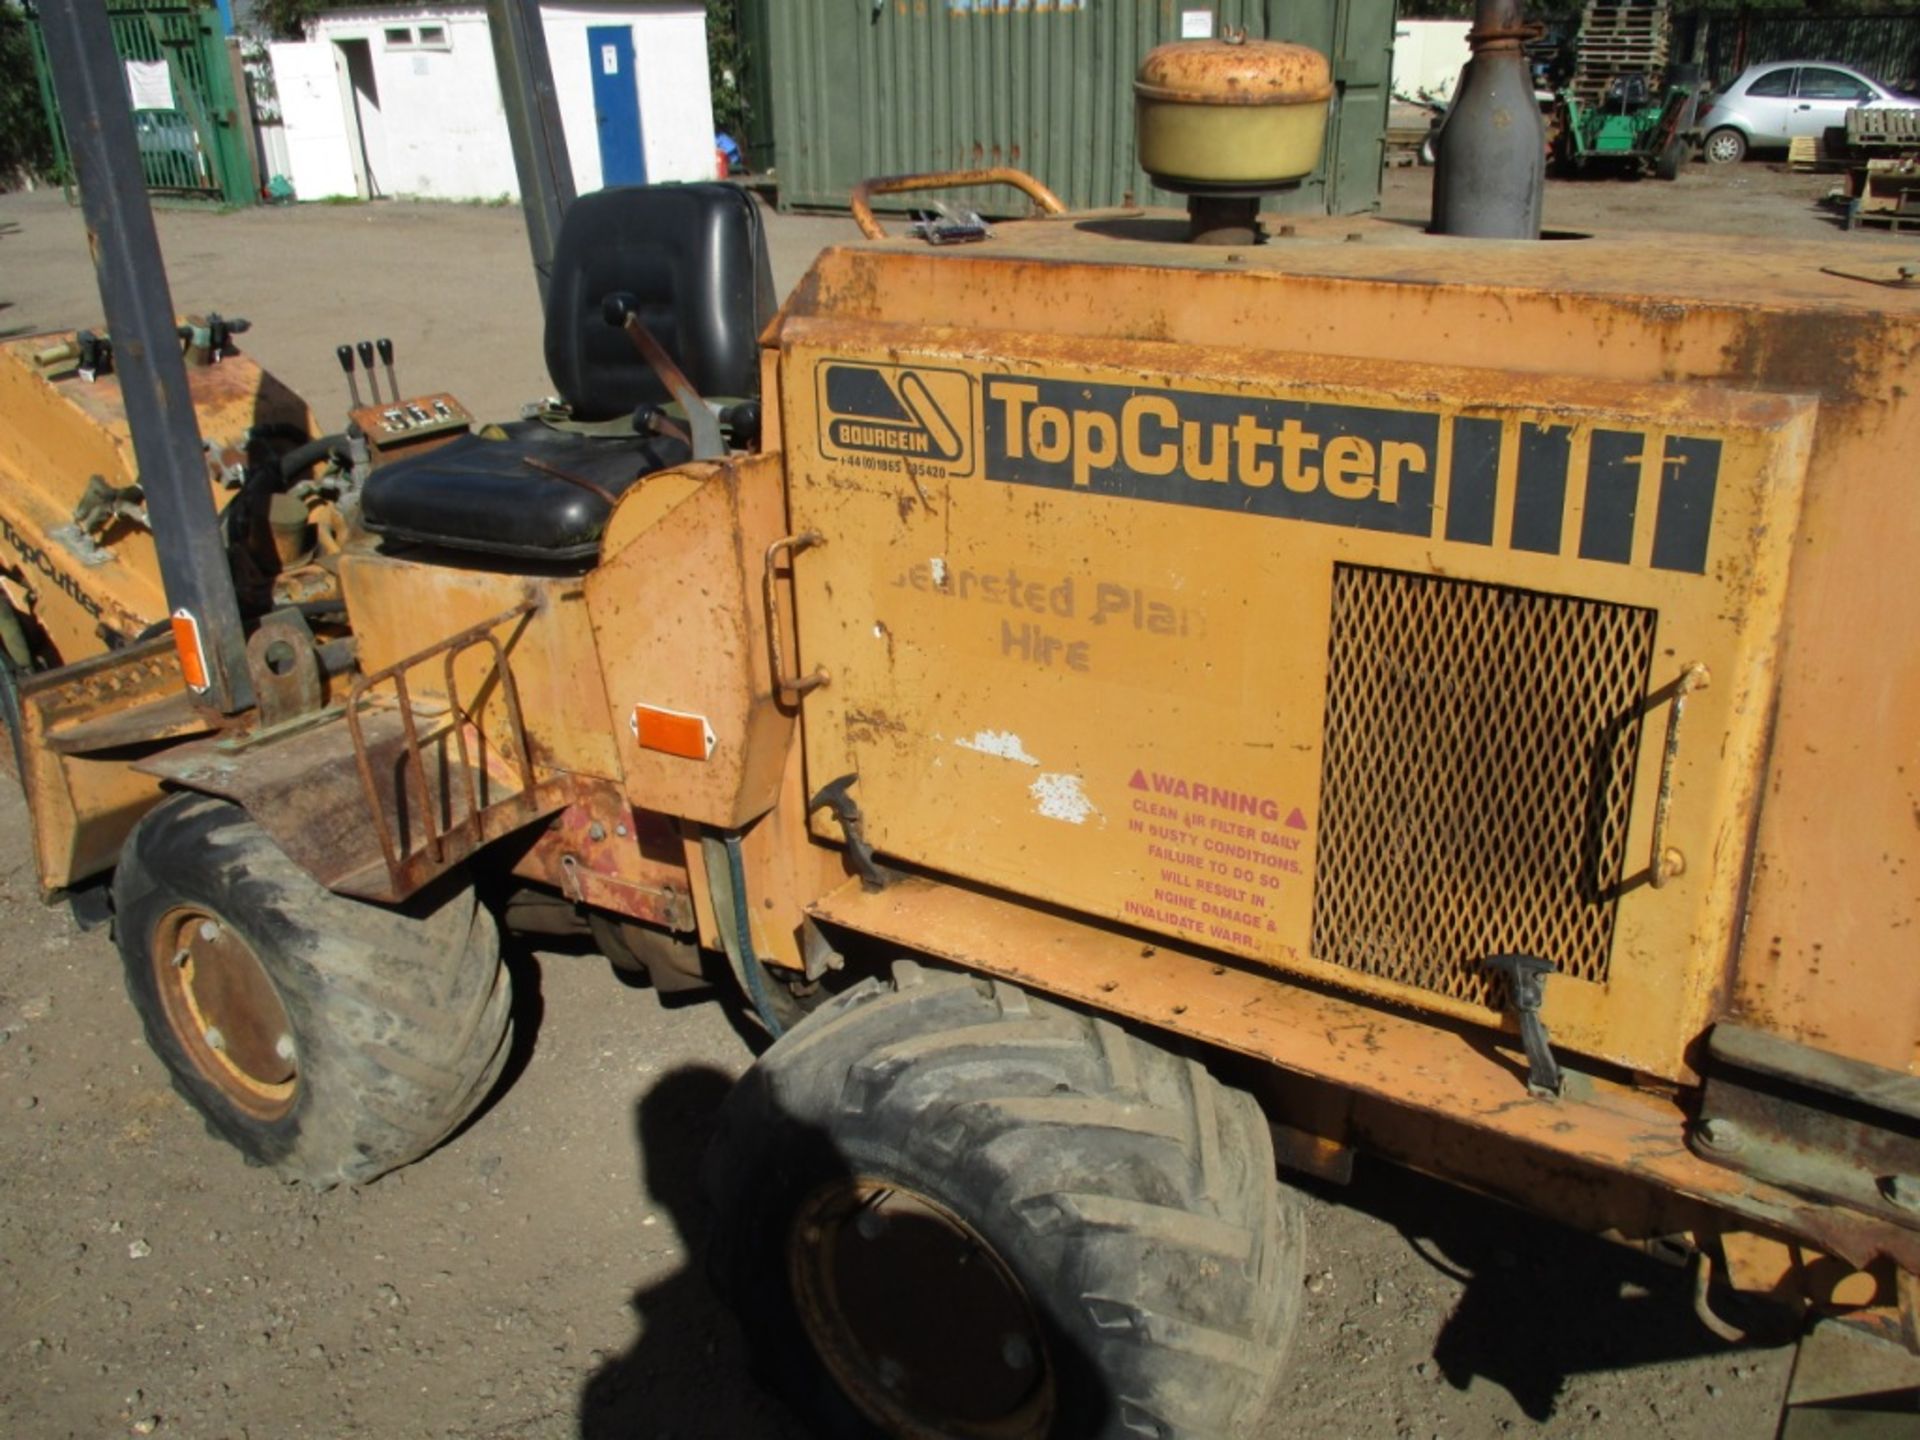 Case Topcutter TC220 toothed wheel trencher